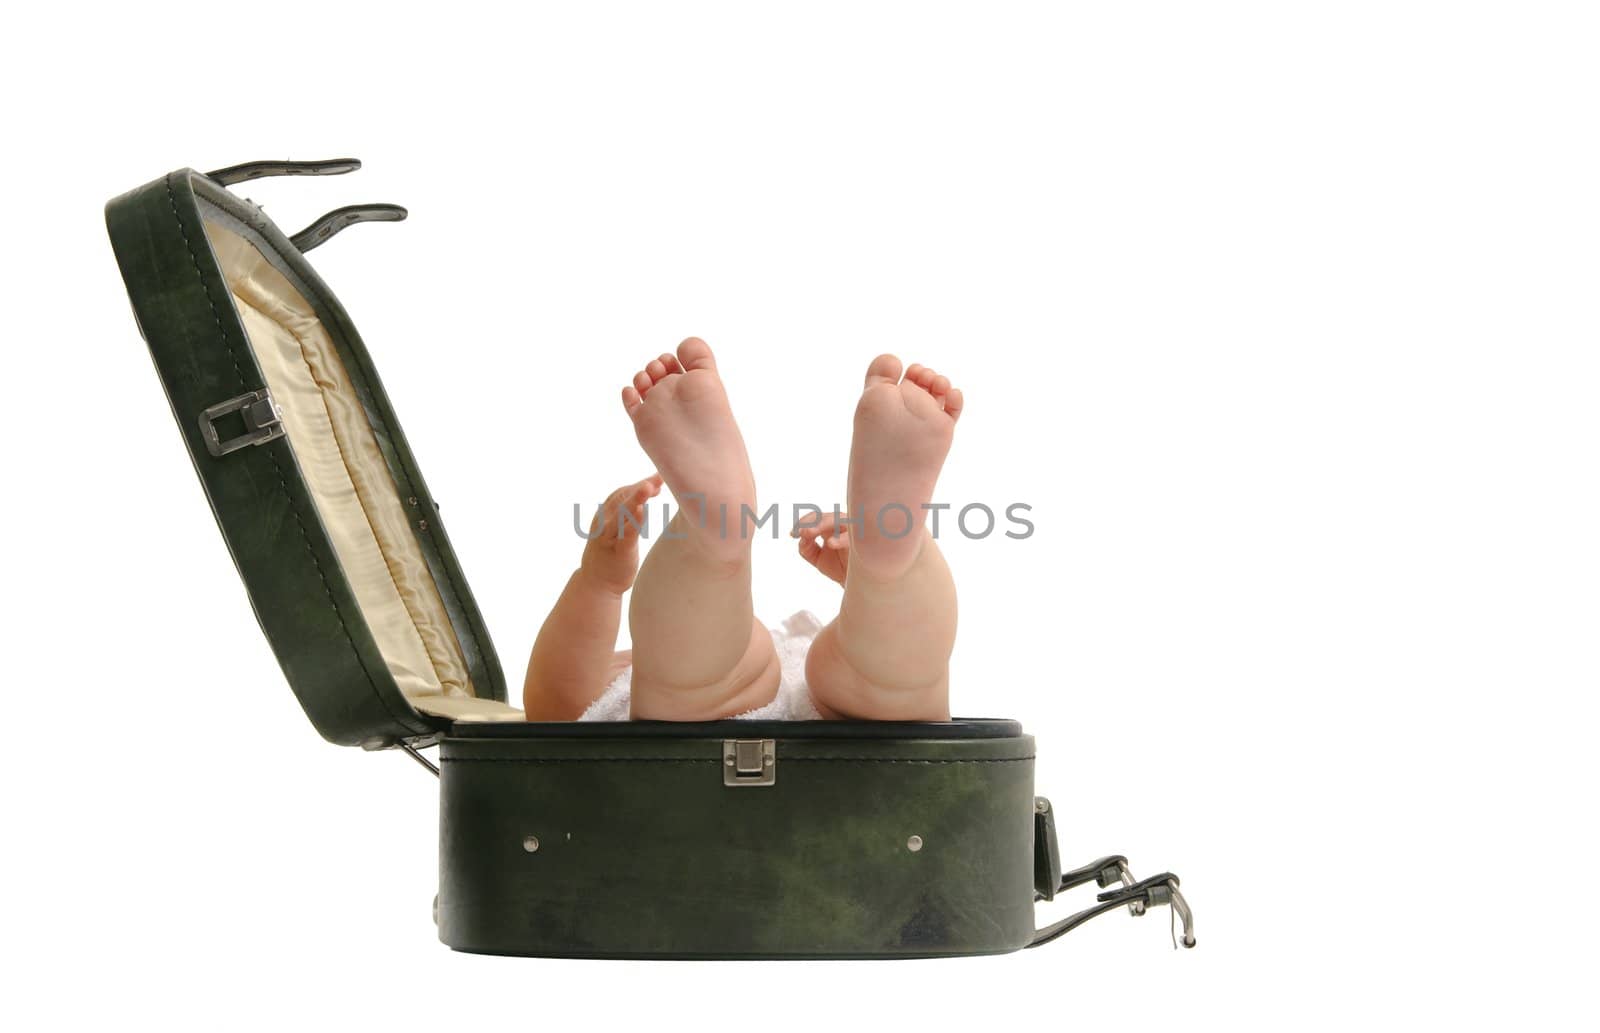 Luggage baby by warrengoldswain